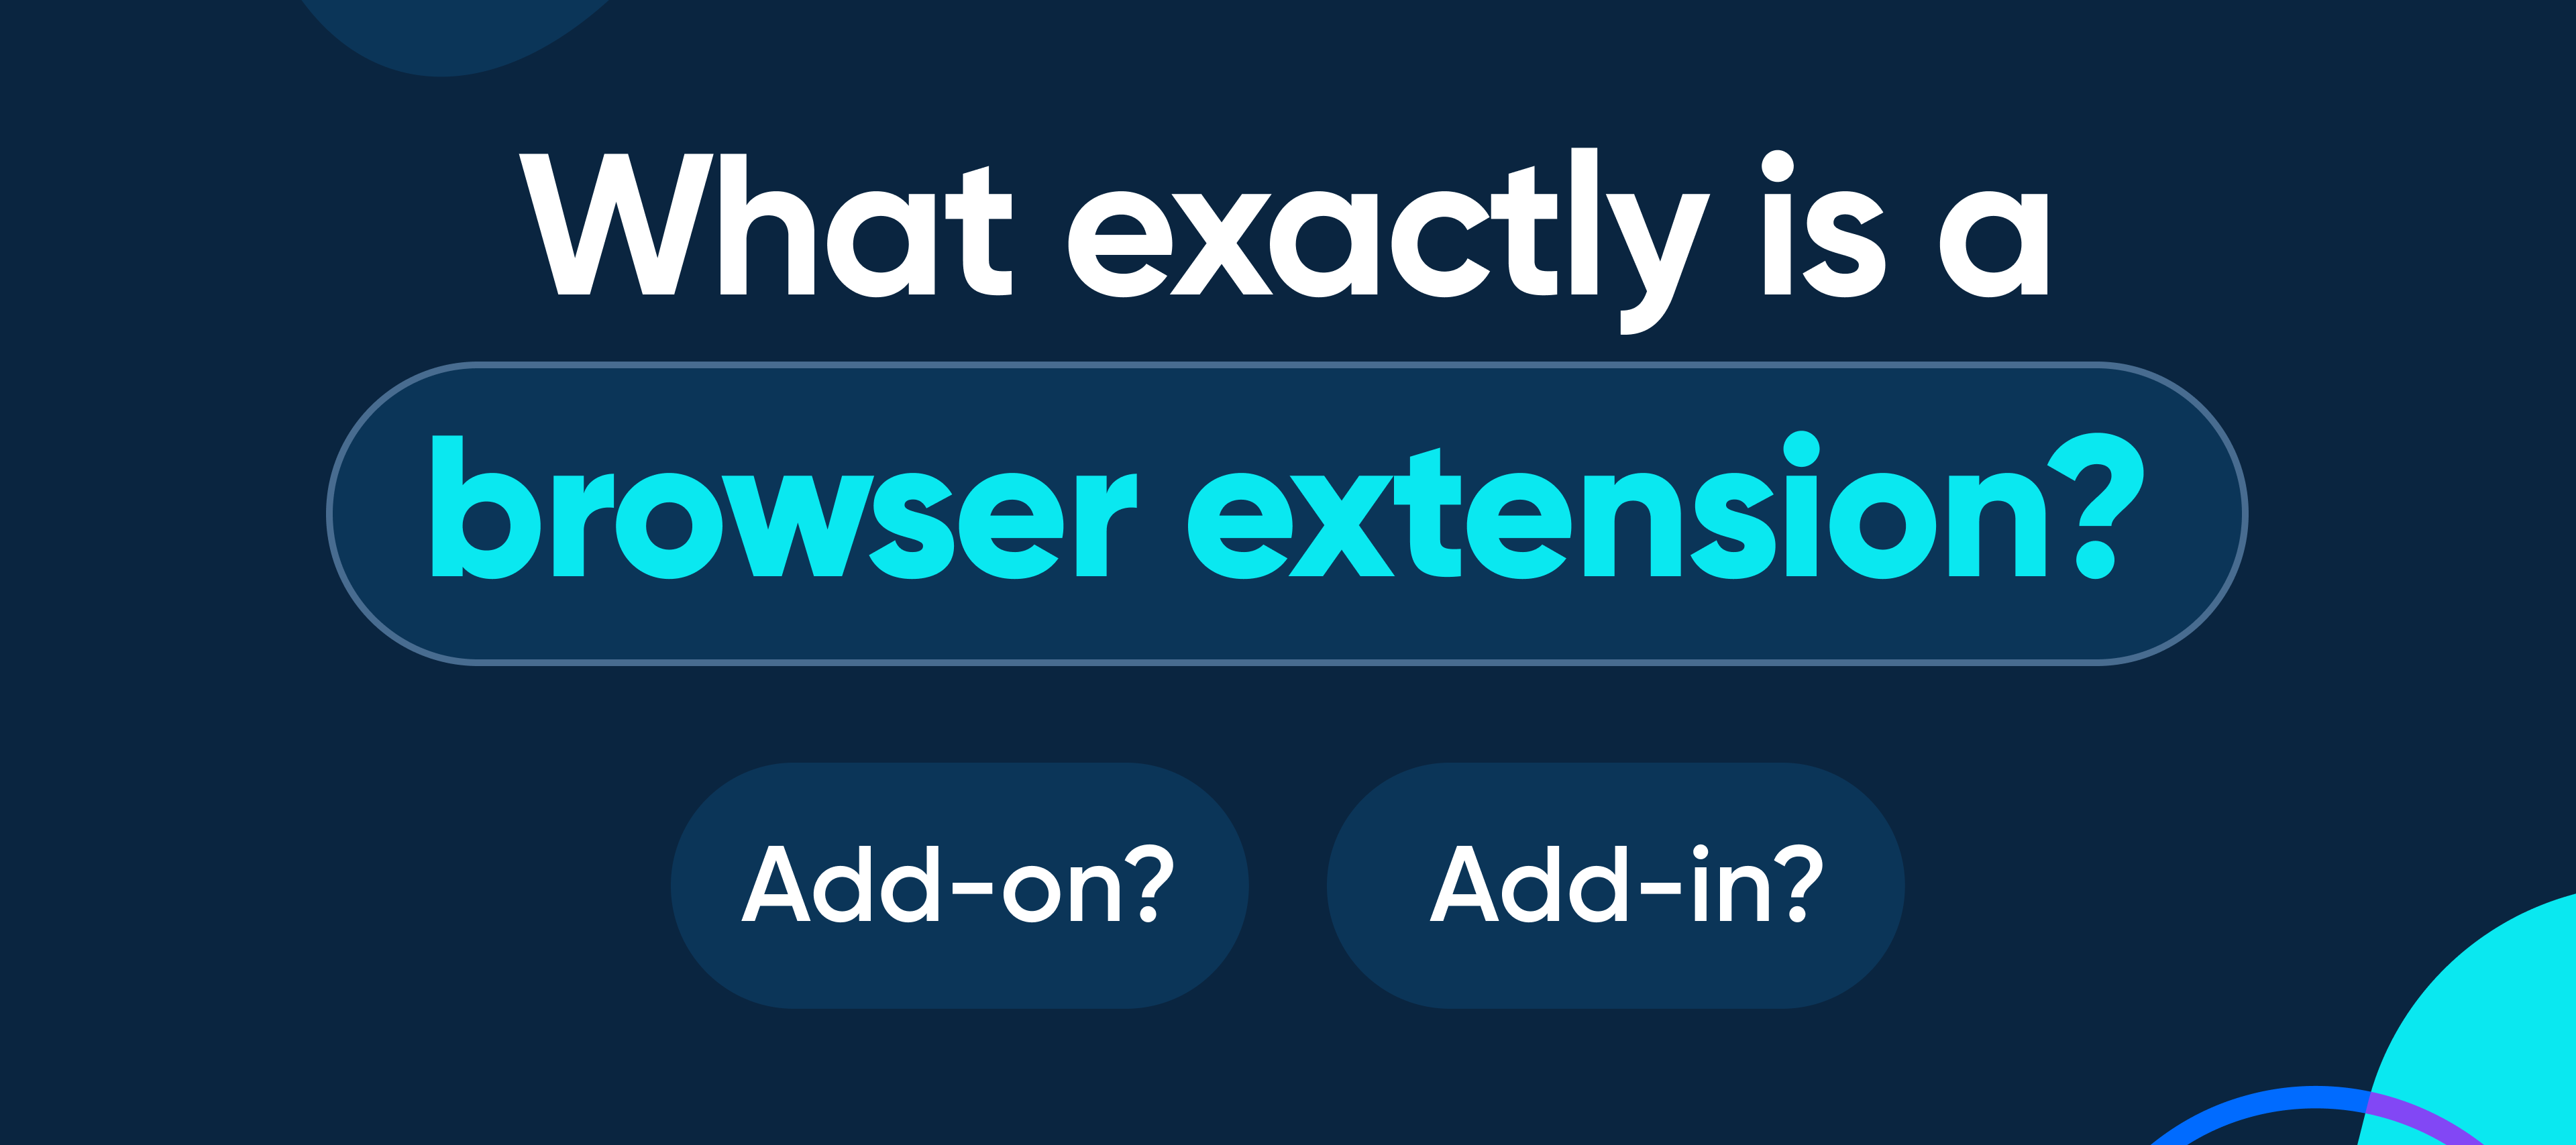 What exactly is a browser extension?